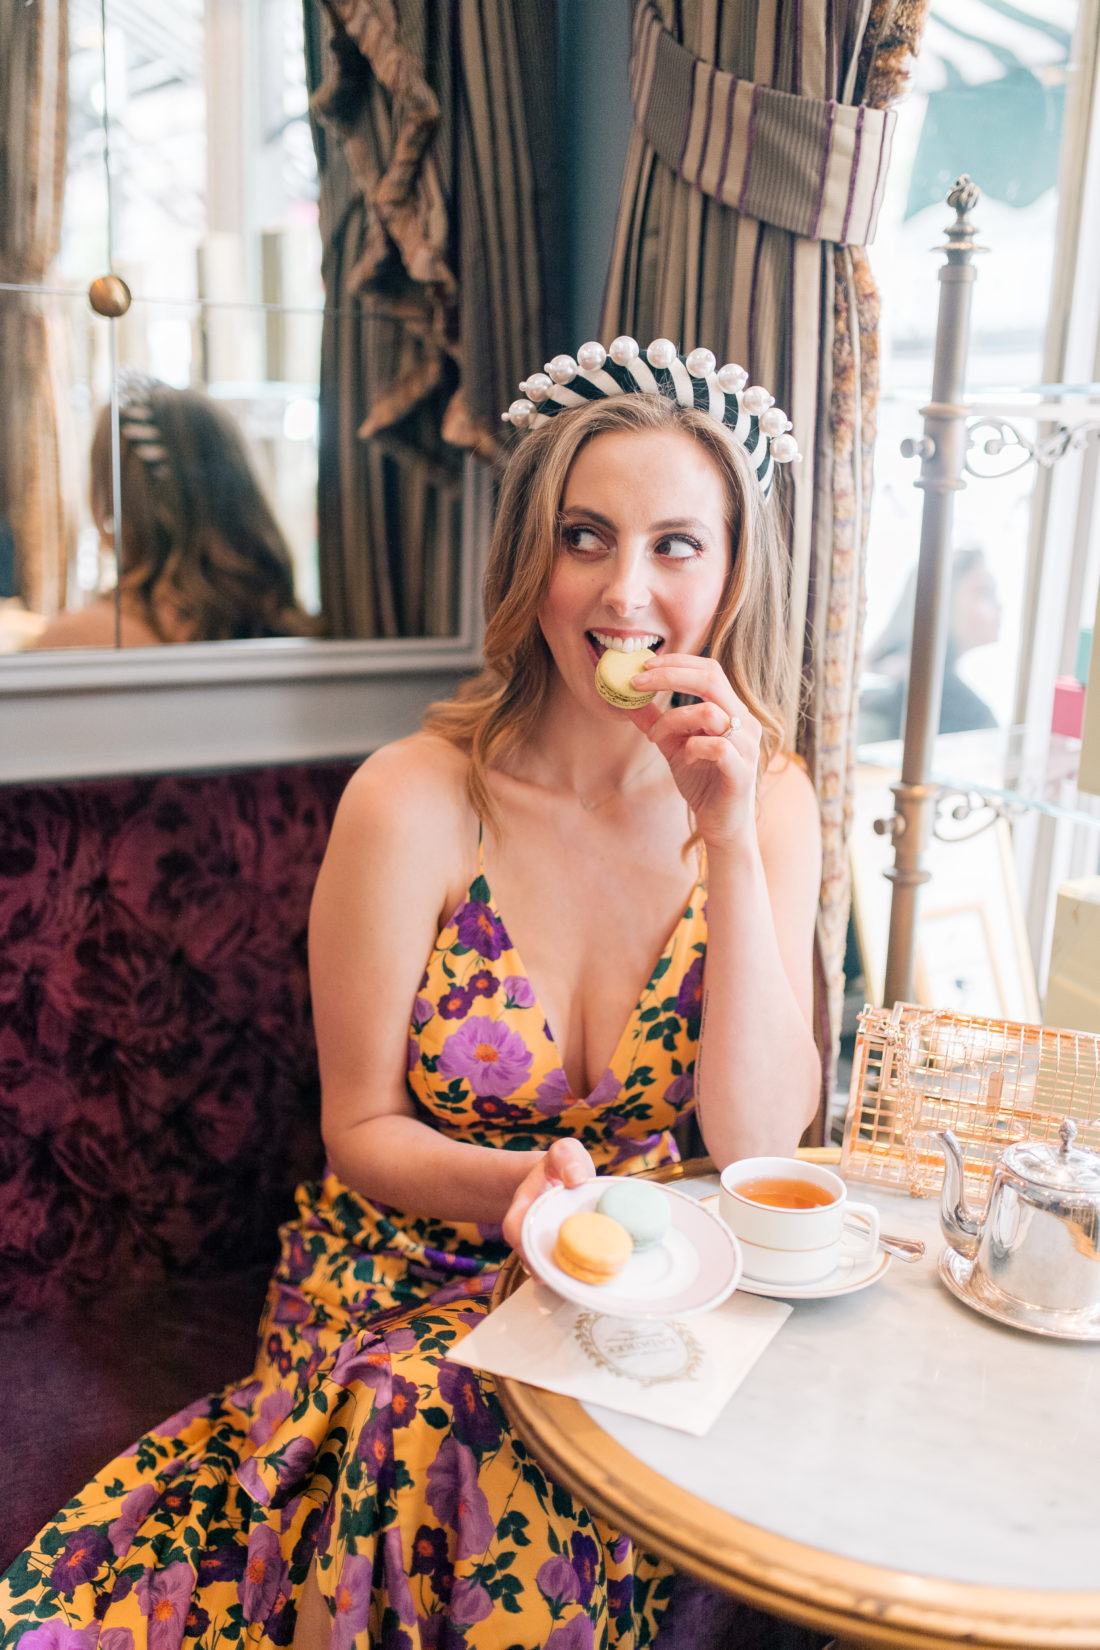 Eva Amurri Martino eats instagrammable food in NYC from Ladurée on the Upper East Side in a bright flowery dress and a headband.